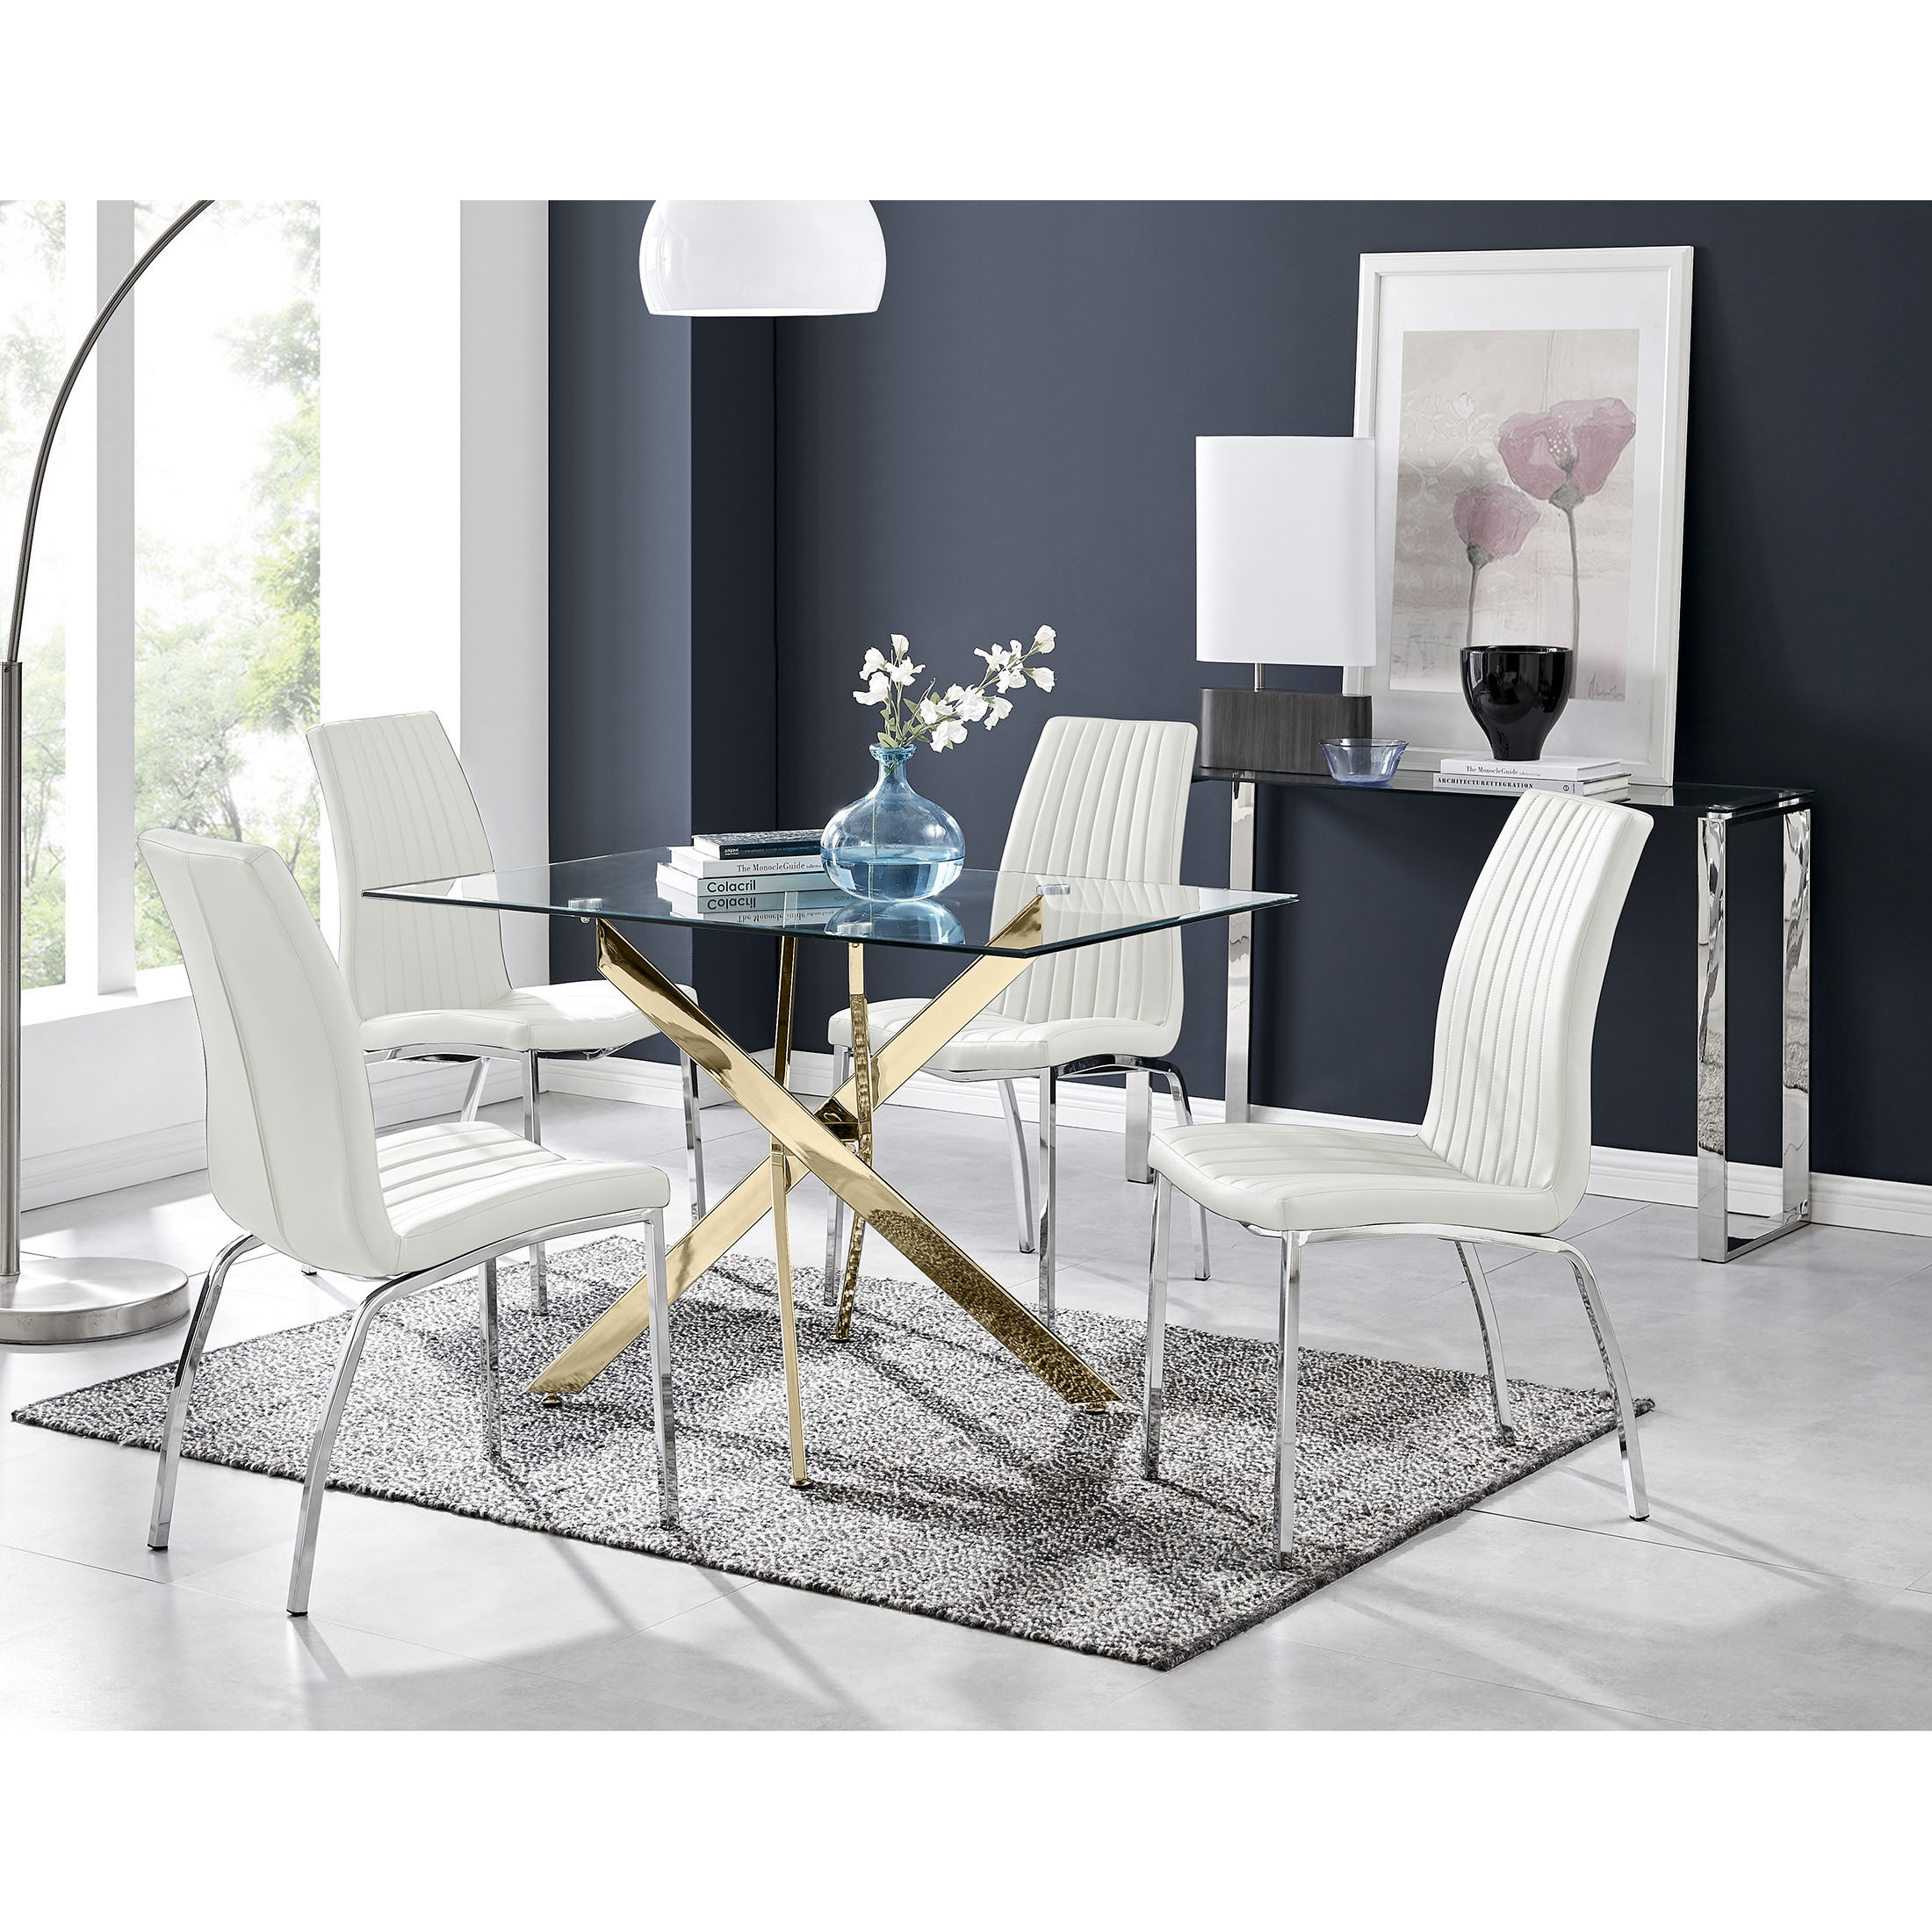 Leonardo 4 Gold Dining Table and 4 Isco Chairs - Furniturebox